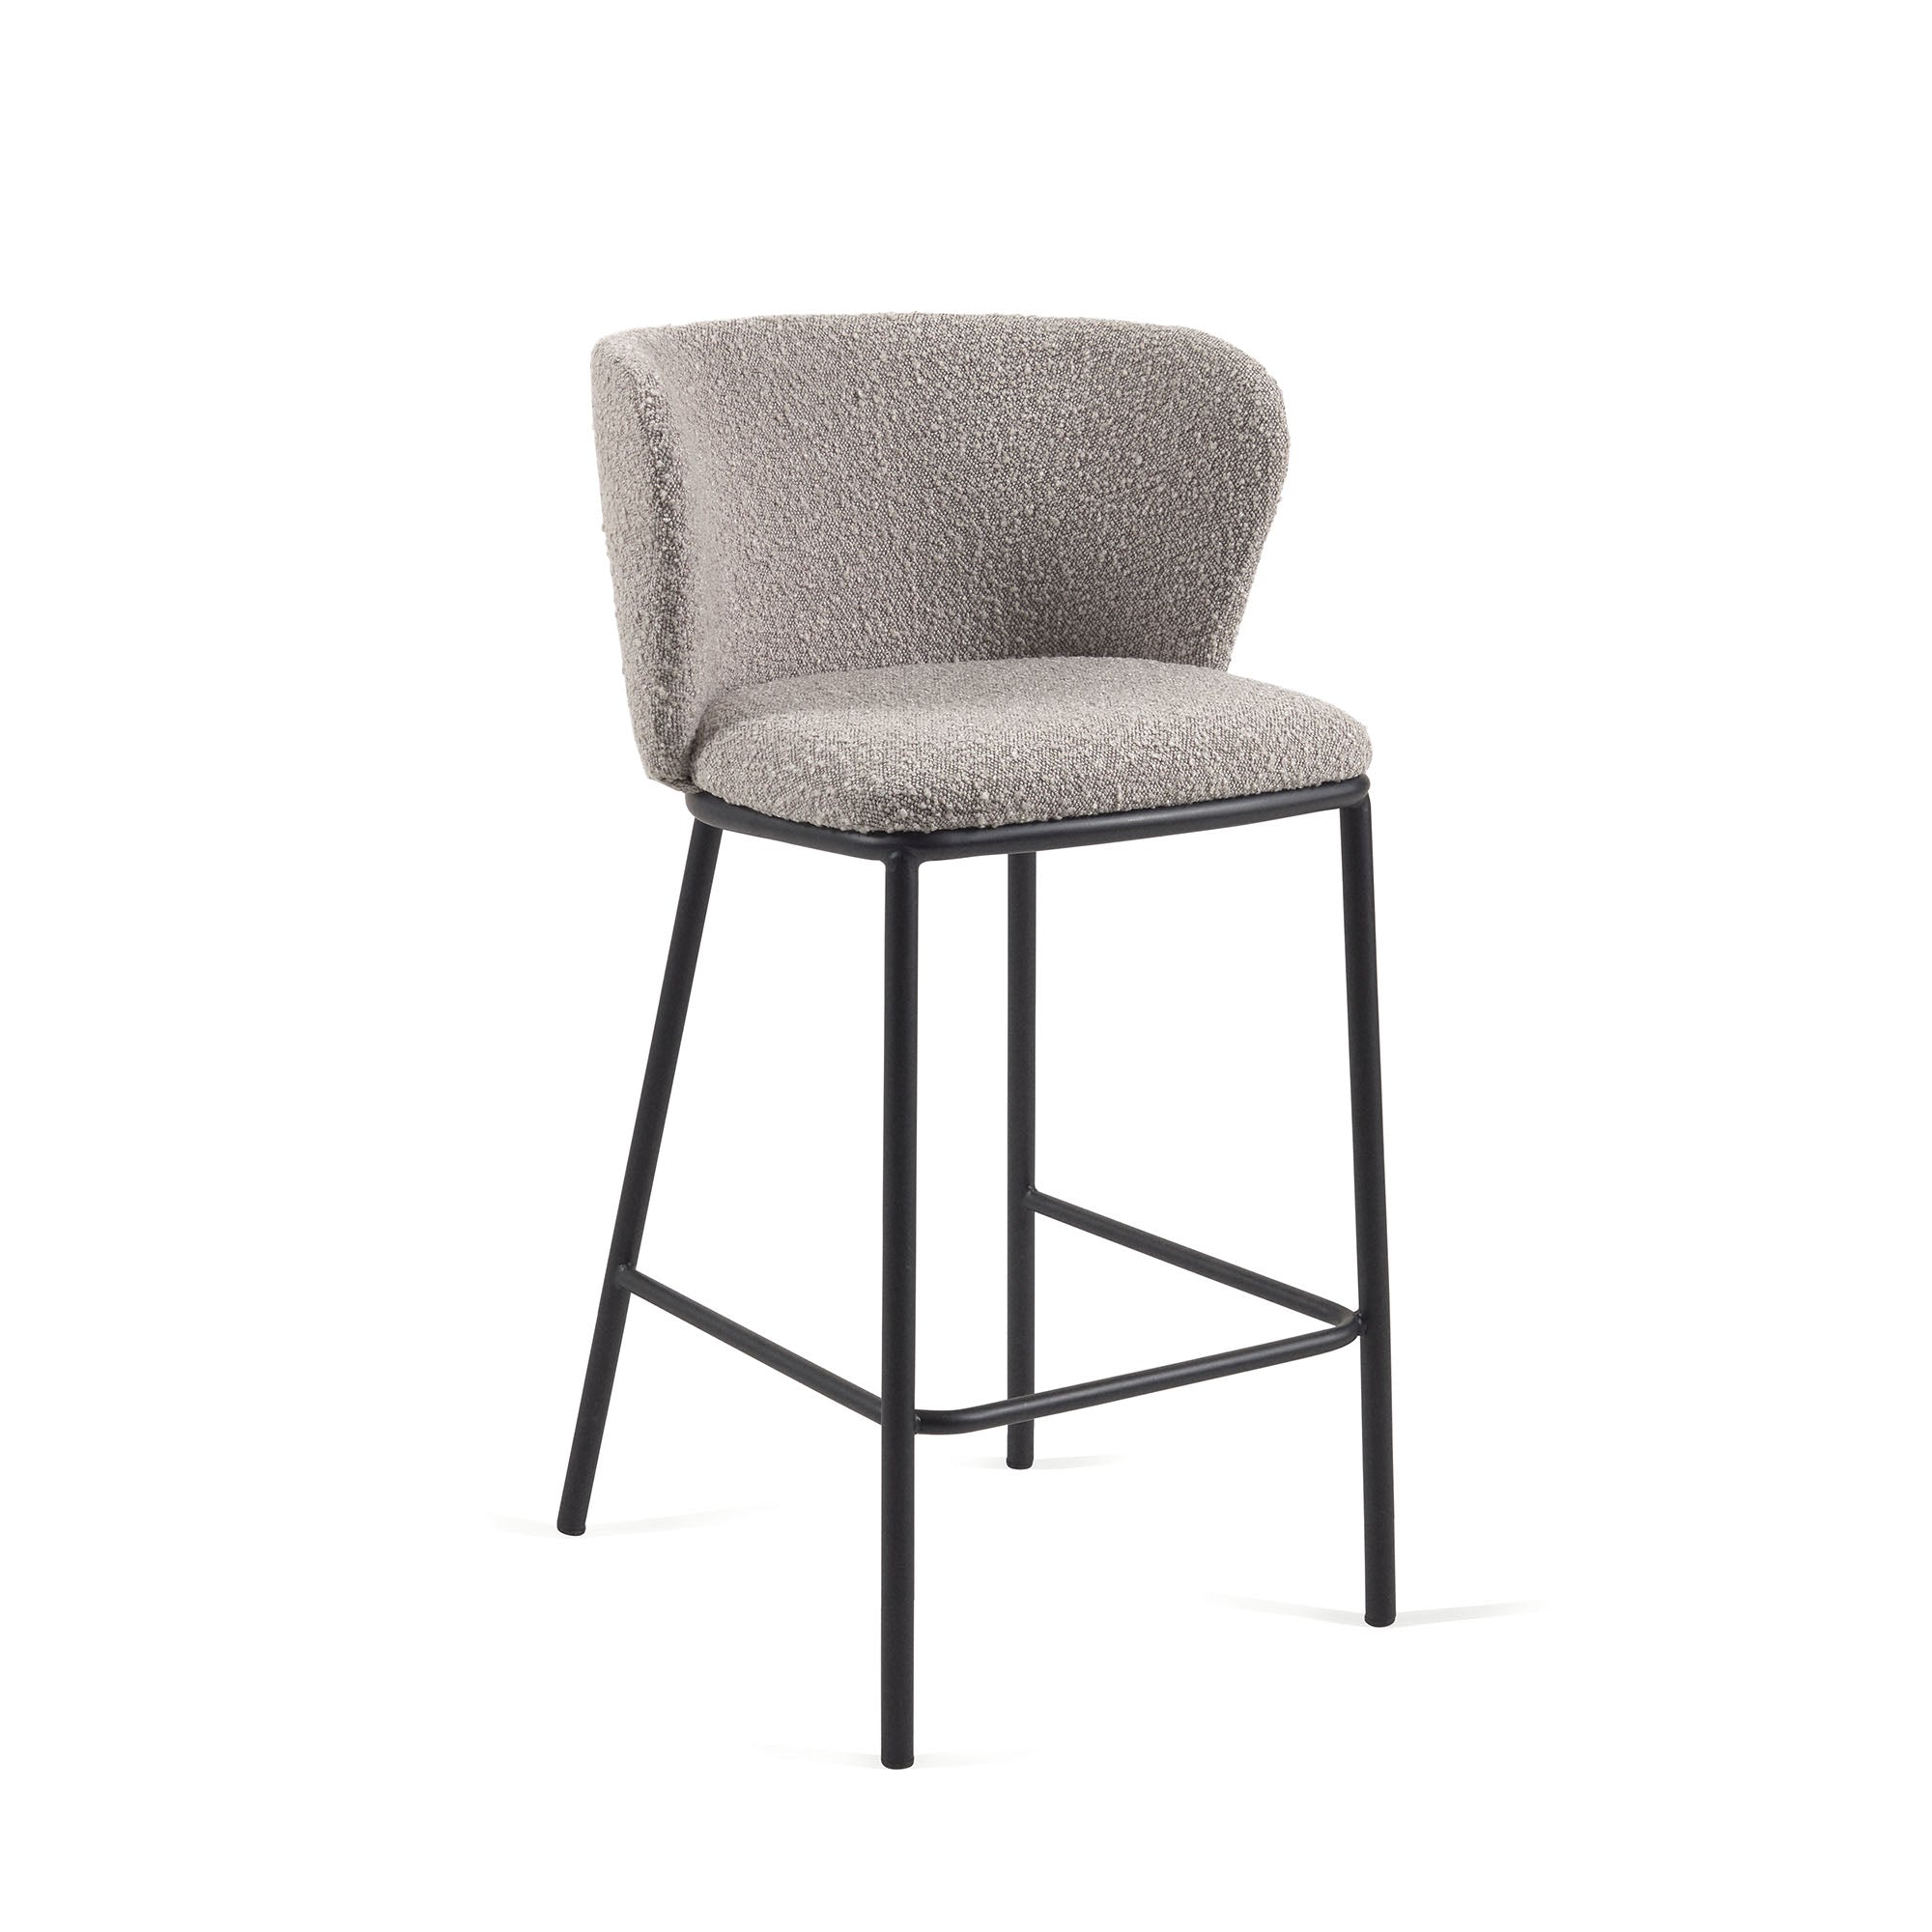 Ciselia stool with light grey shearling and black metal, height 65 cm